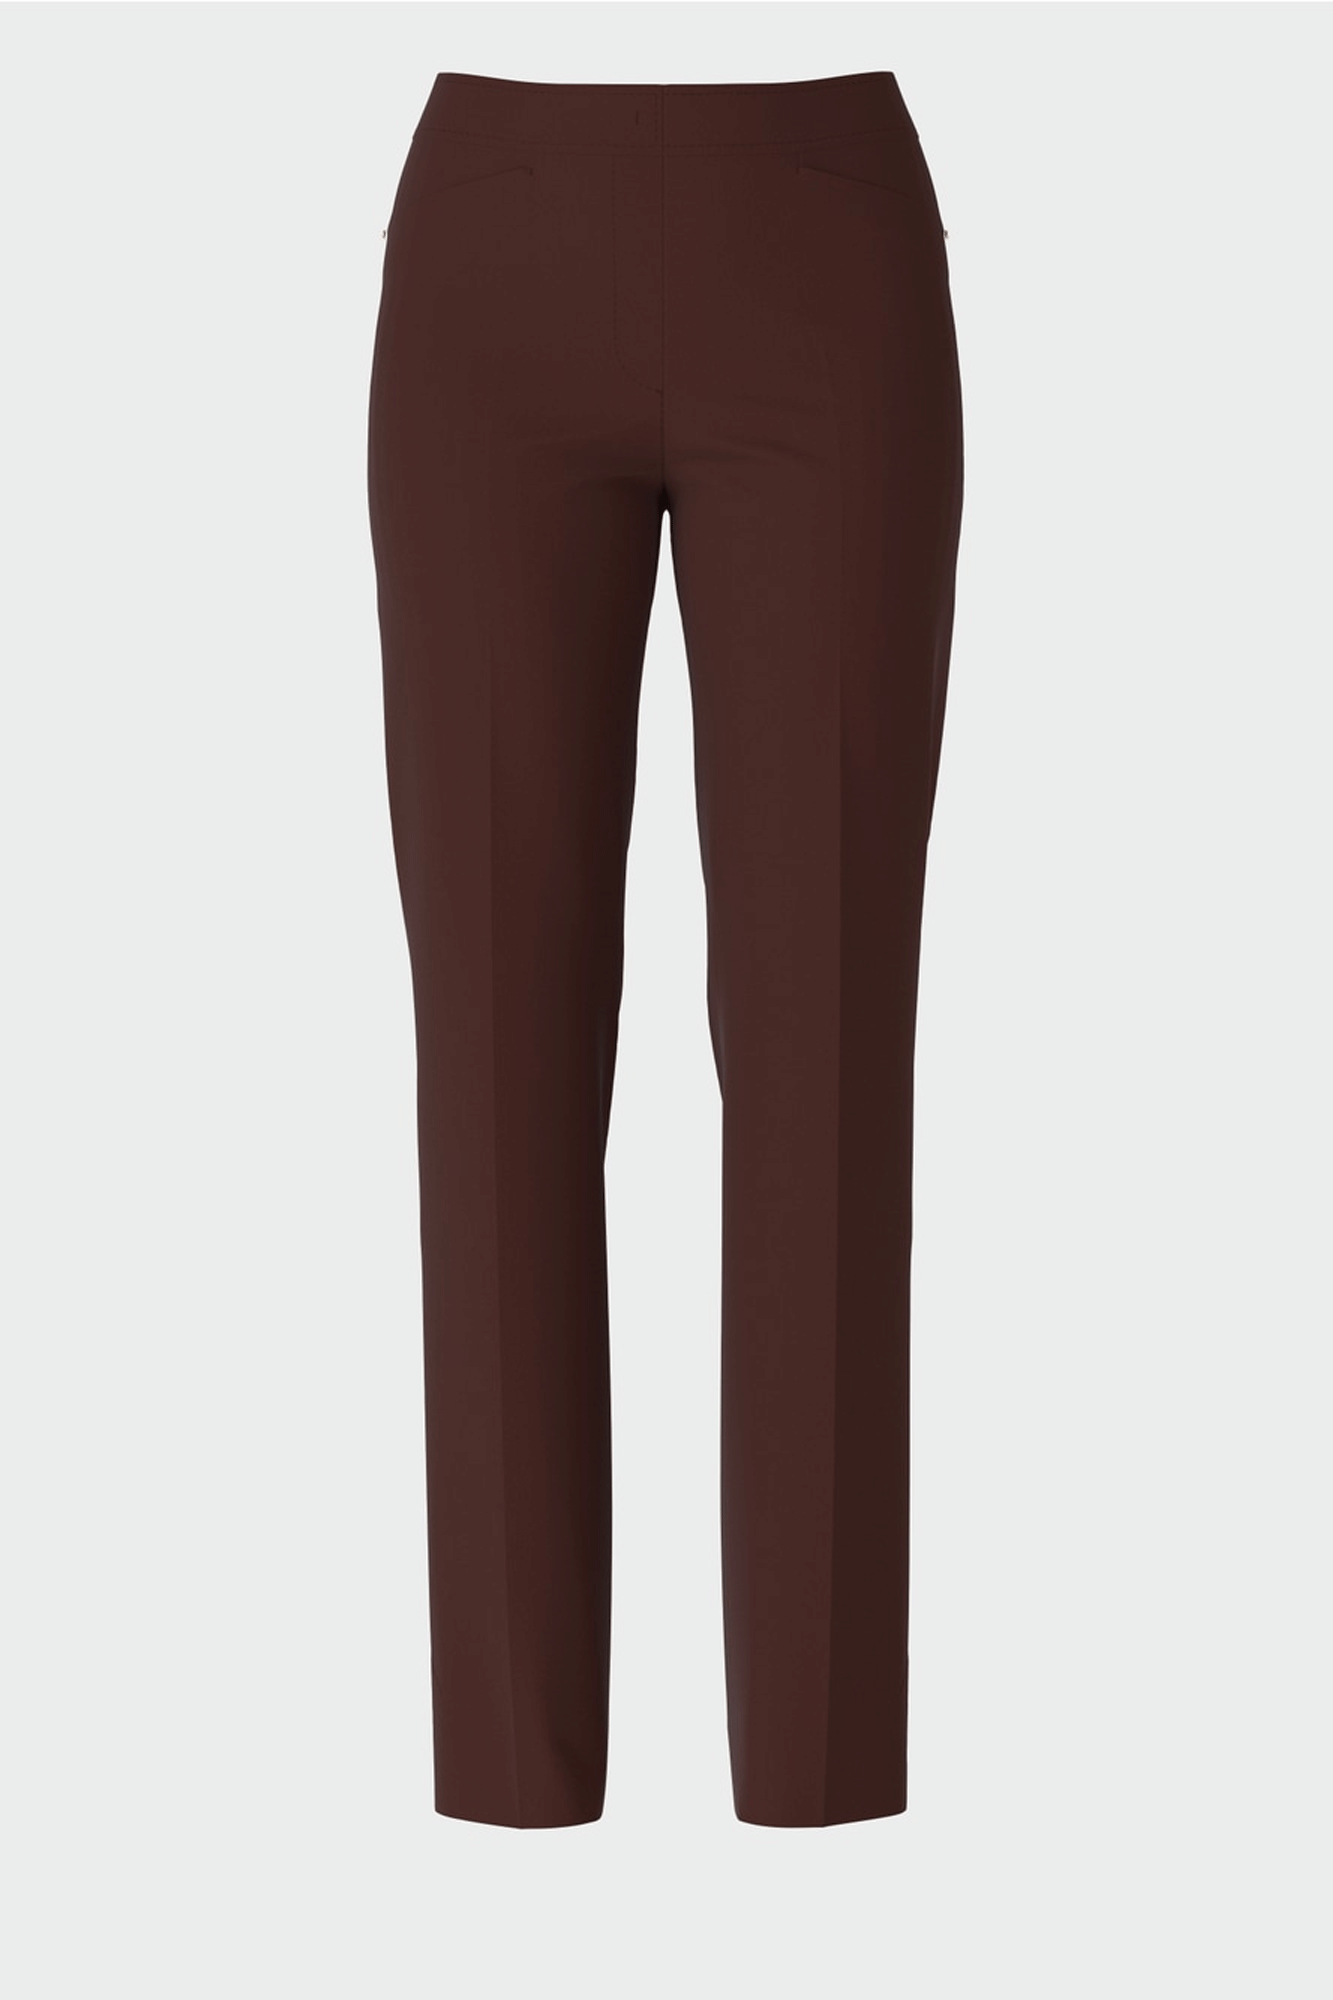 The Straight Leg Pant from Marc Cain is a perfect mix of comfort and style. Crafted from a soft fabric blend, the trousers feature a stitched crease and side pockets for convenience. Decorative pockets at the back add a classic touch, and are fastened with a zip and hook. Enjoy effortless style with these stretchy, feminine FENDOU pants.